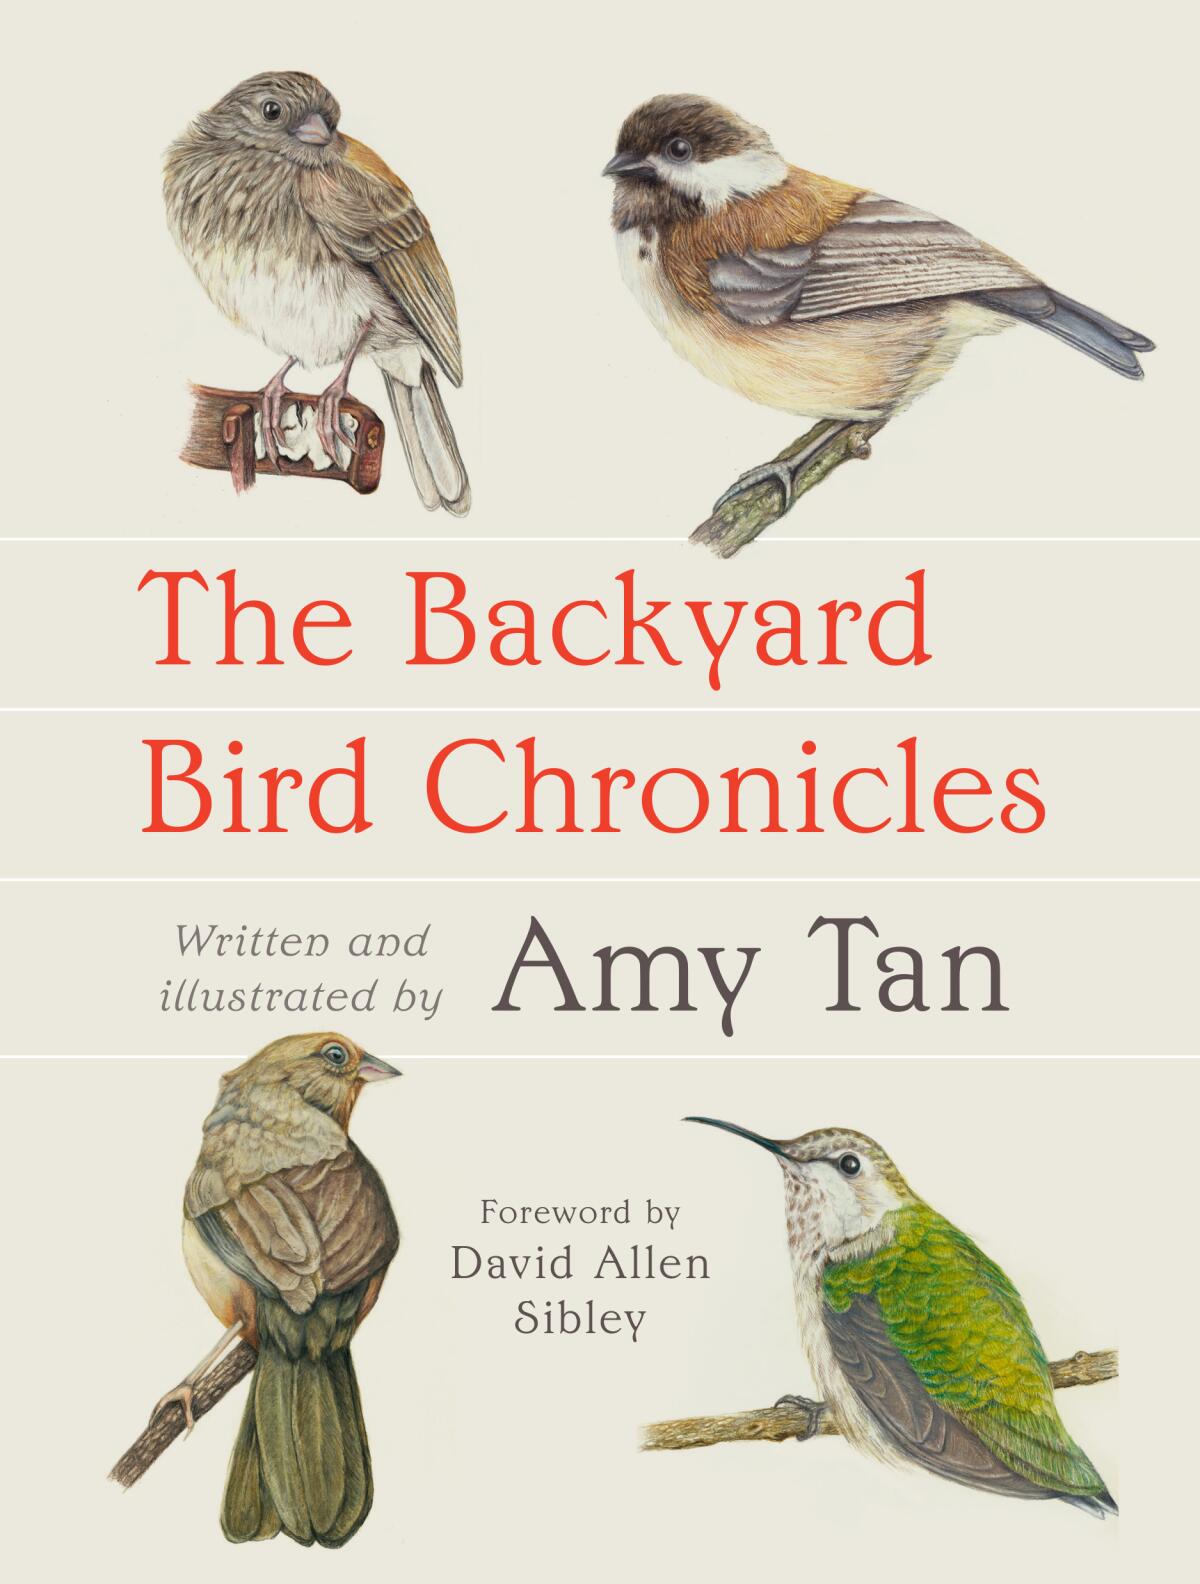 Book jacket for Amy Tan's "The Backyard Book Chronicles."